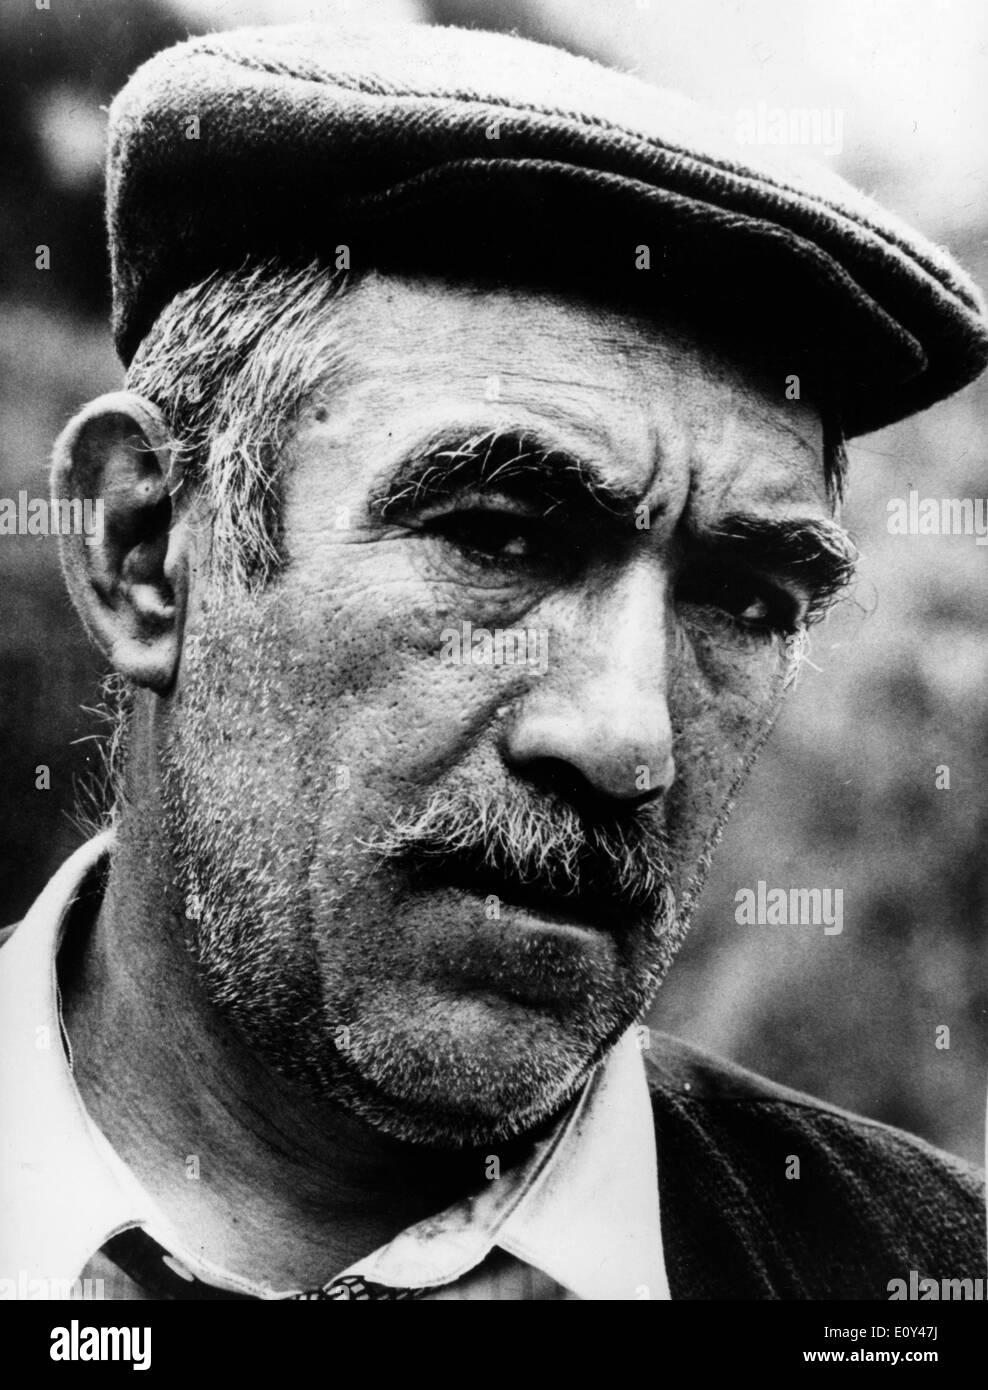 Actor Anthony Quinn in a film scene Stock Photo